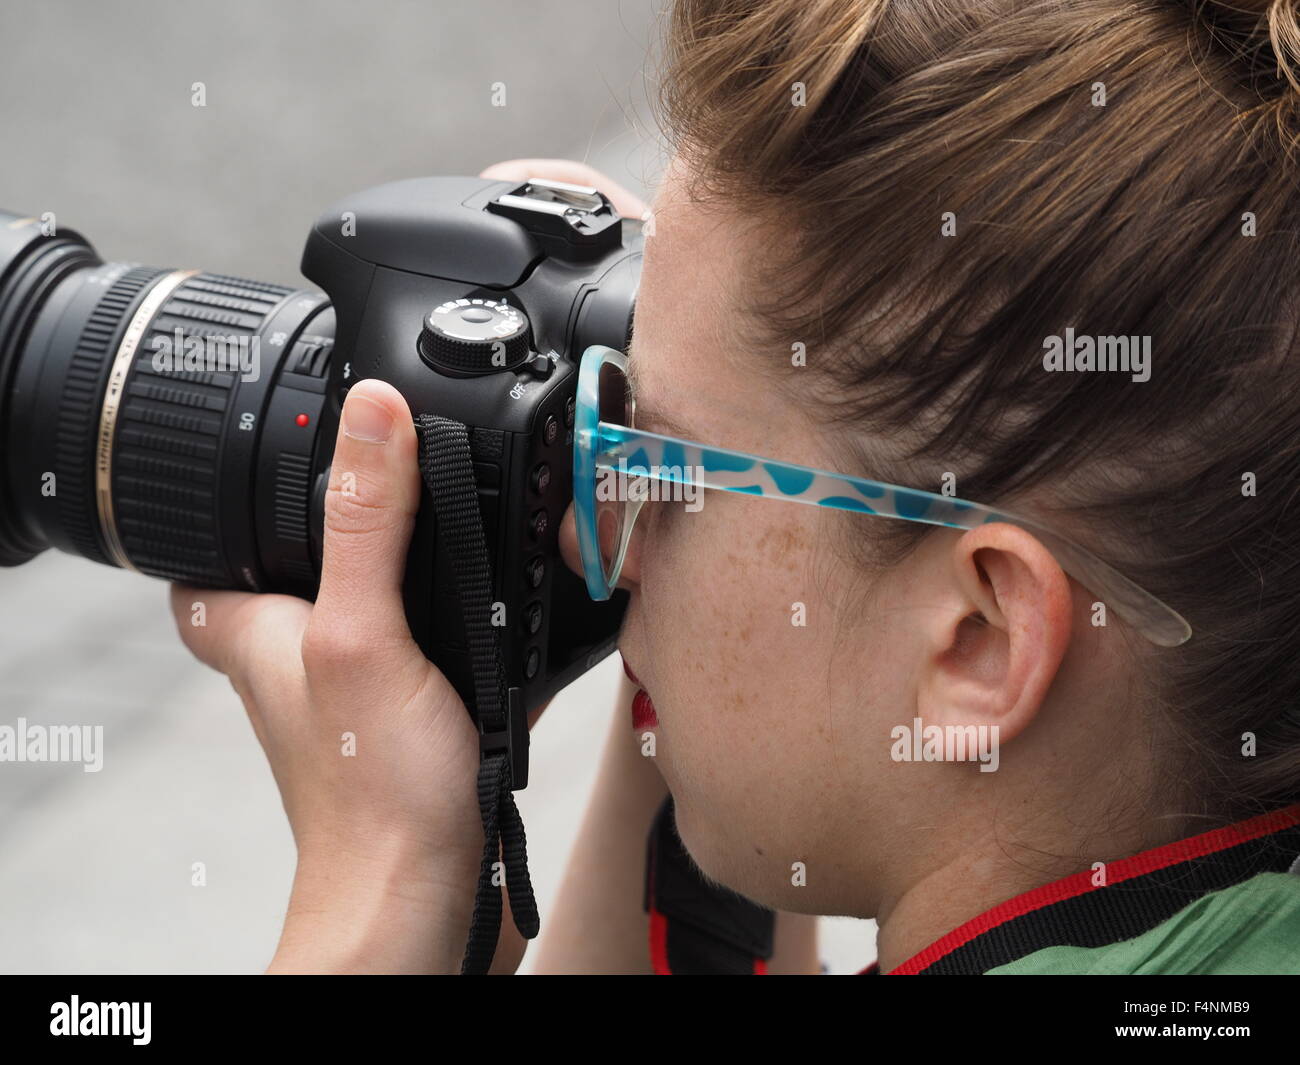 Female photographer wearing sunglasses looking through viewfinder of DSLR camera with zoom lens Stock Photo